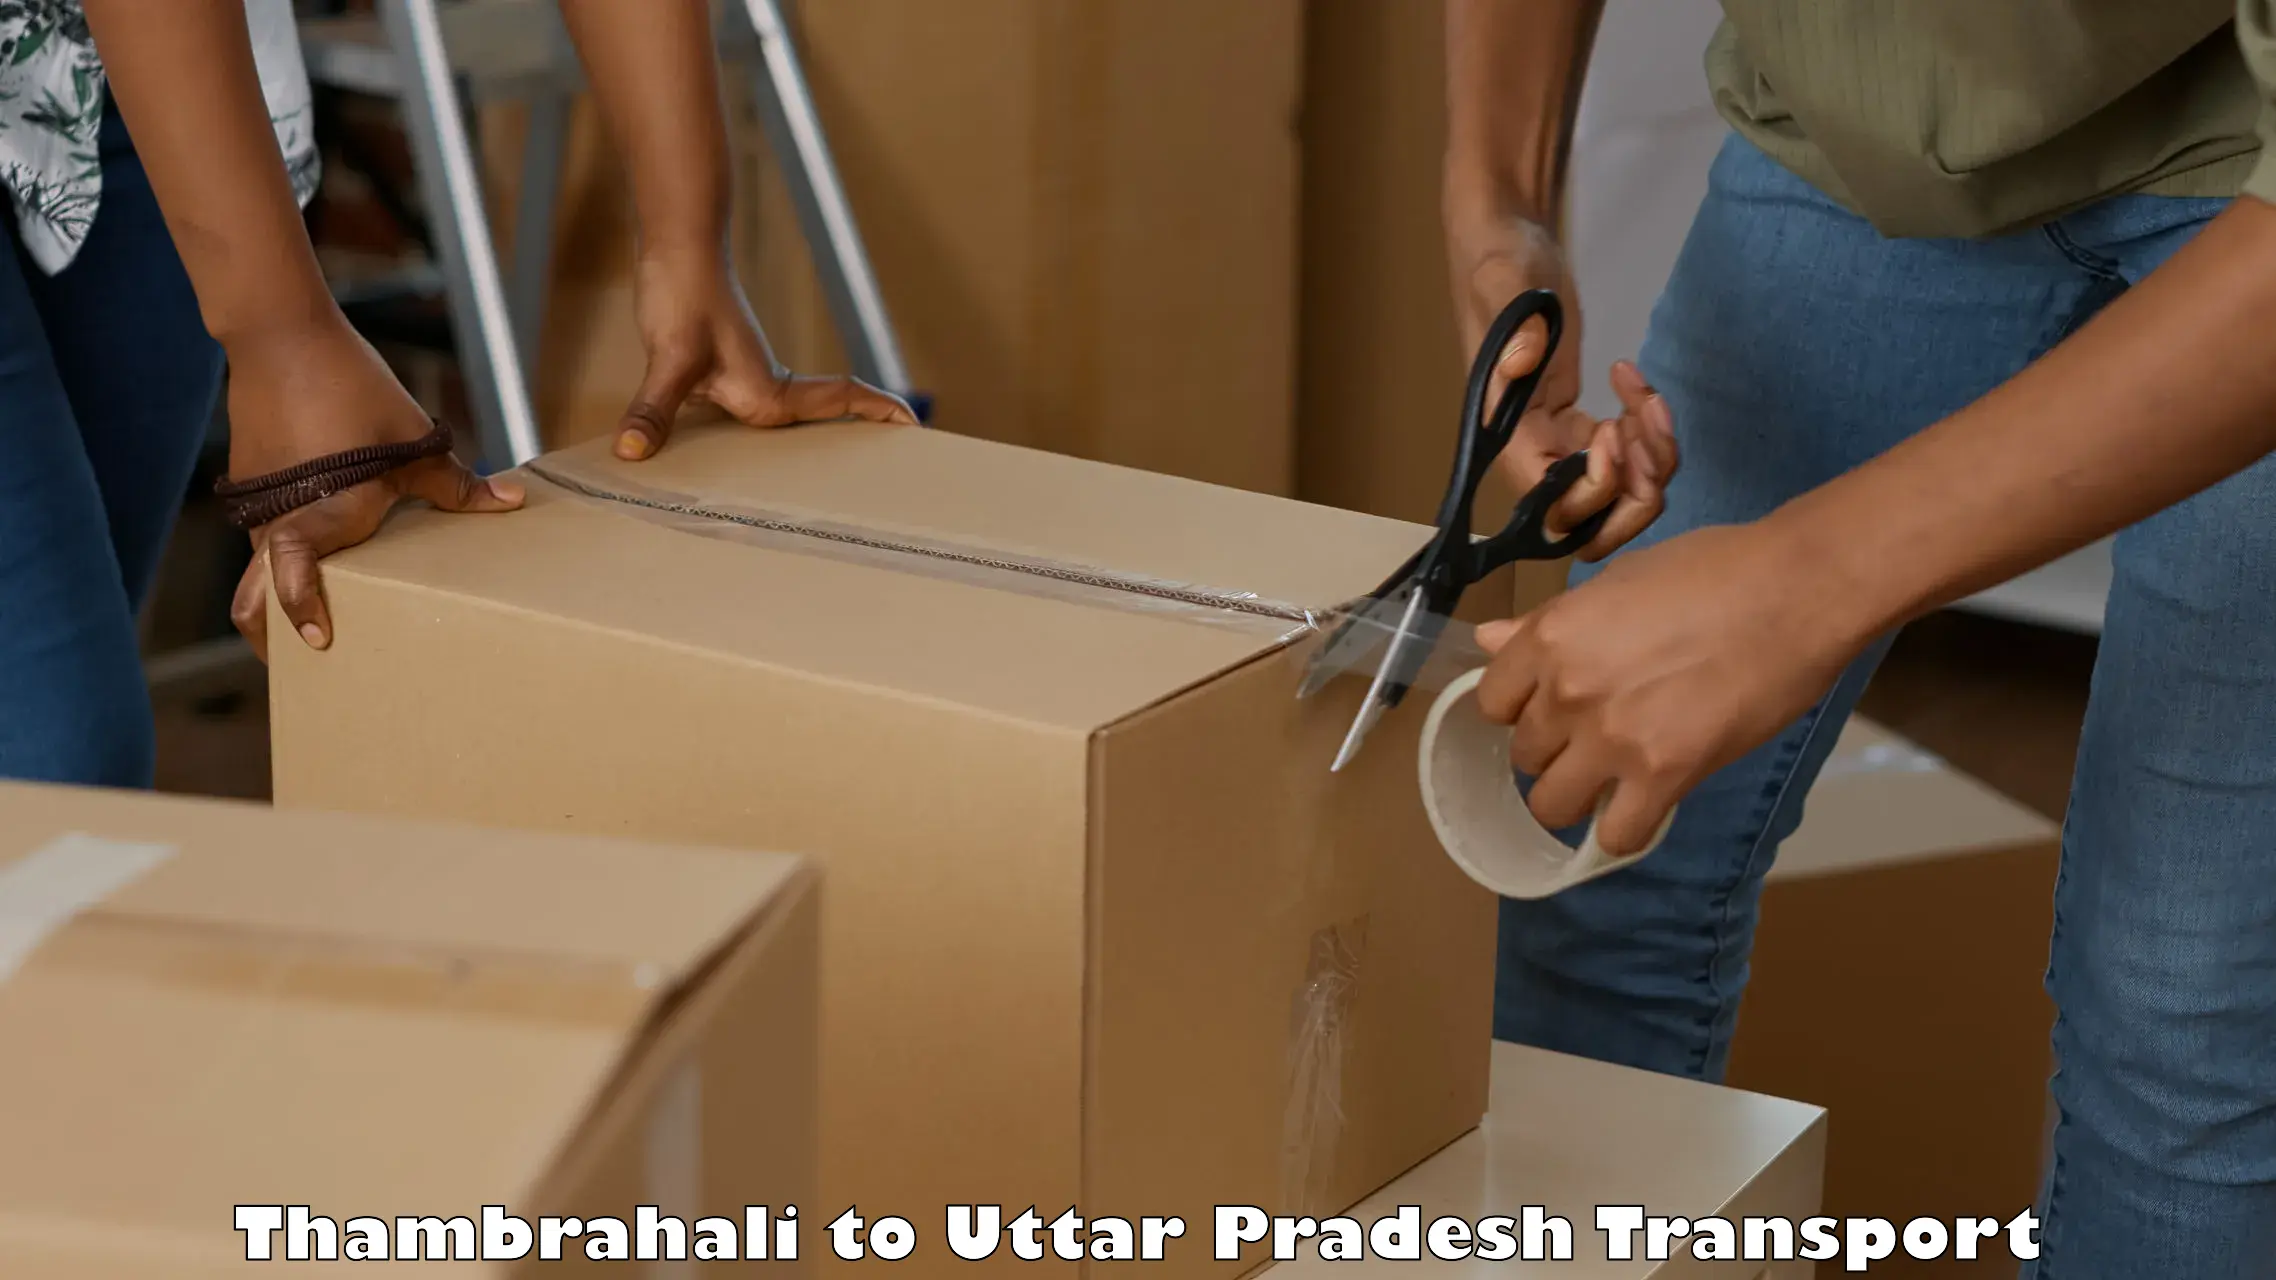 Daily parcel service transport Thambrahali to IIT Kanpur